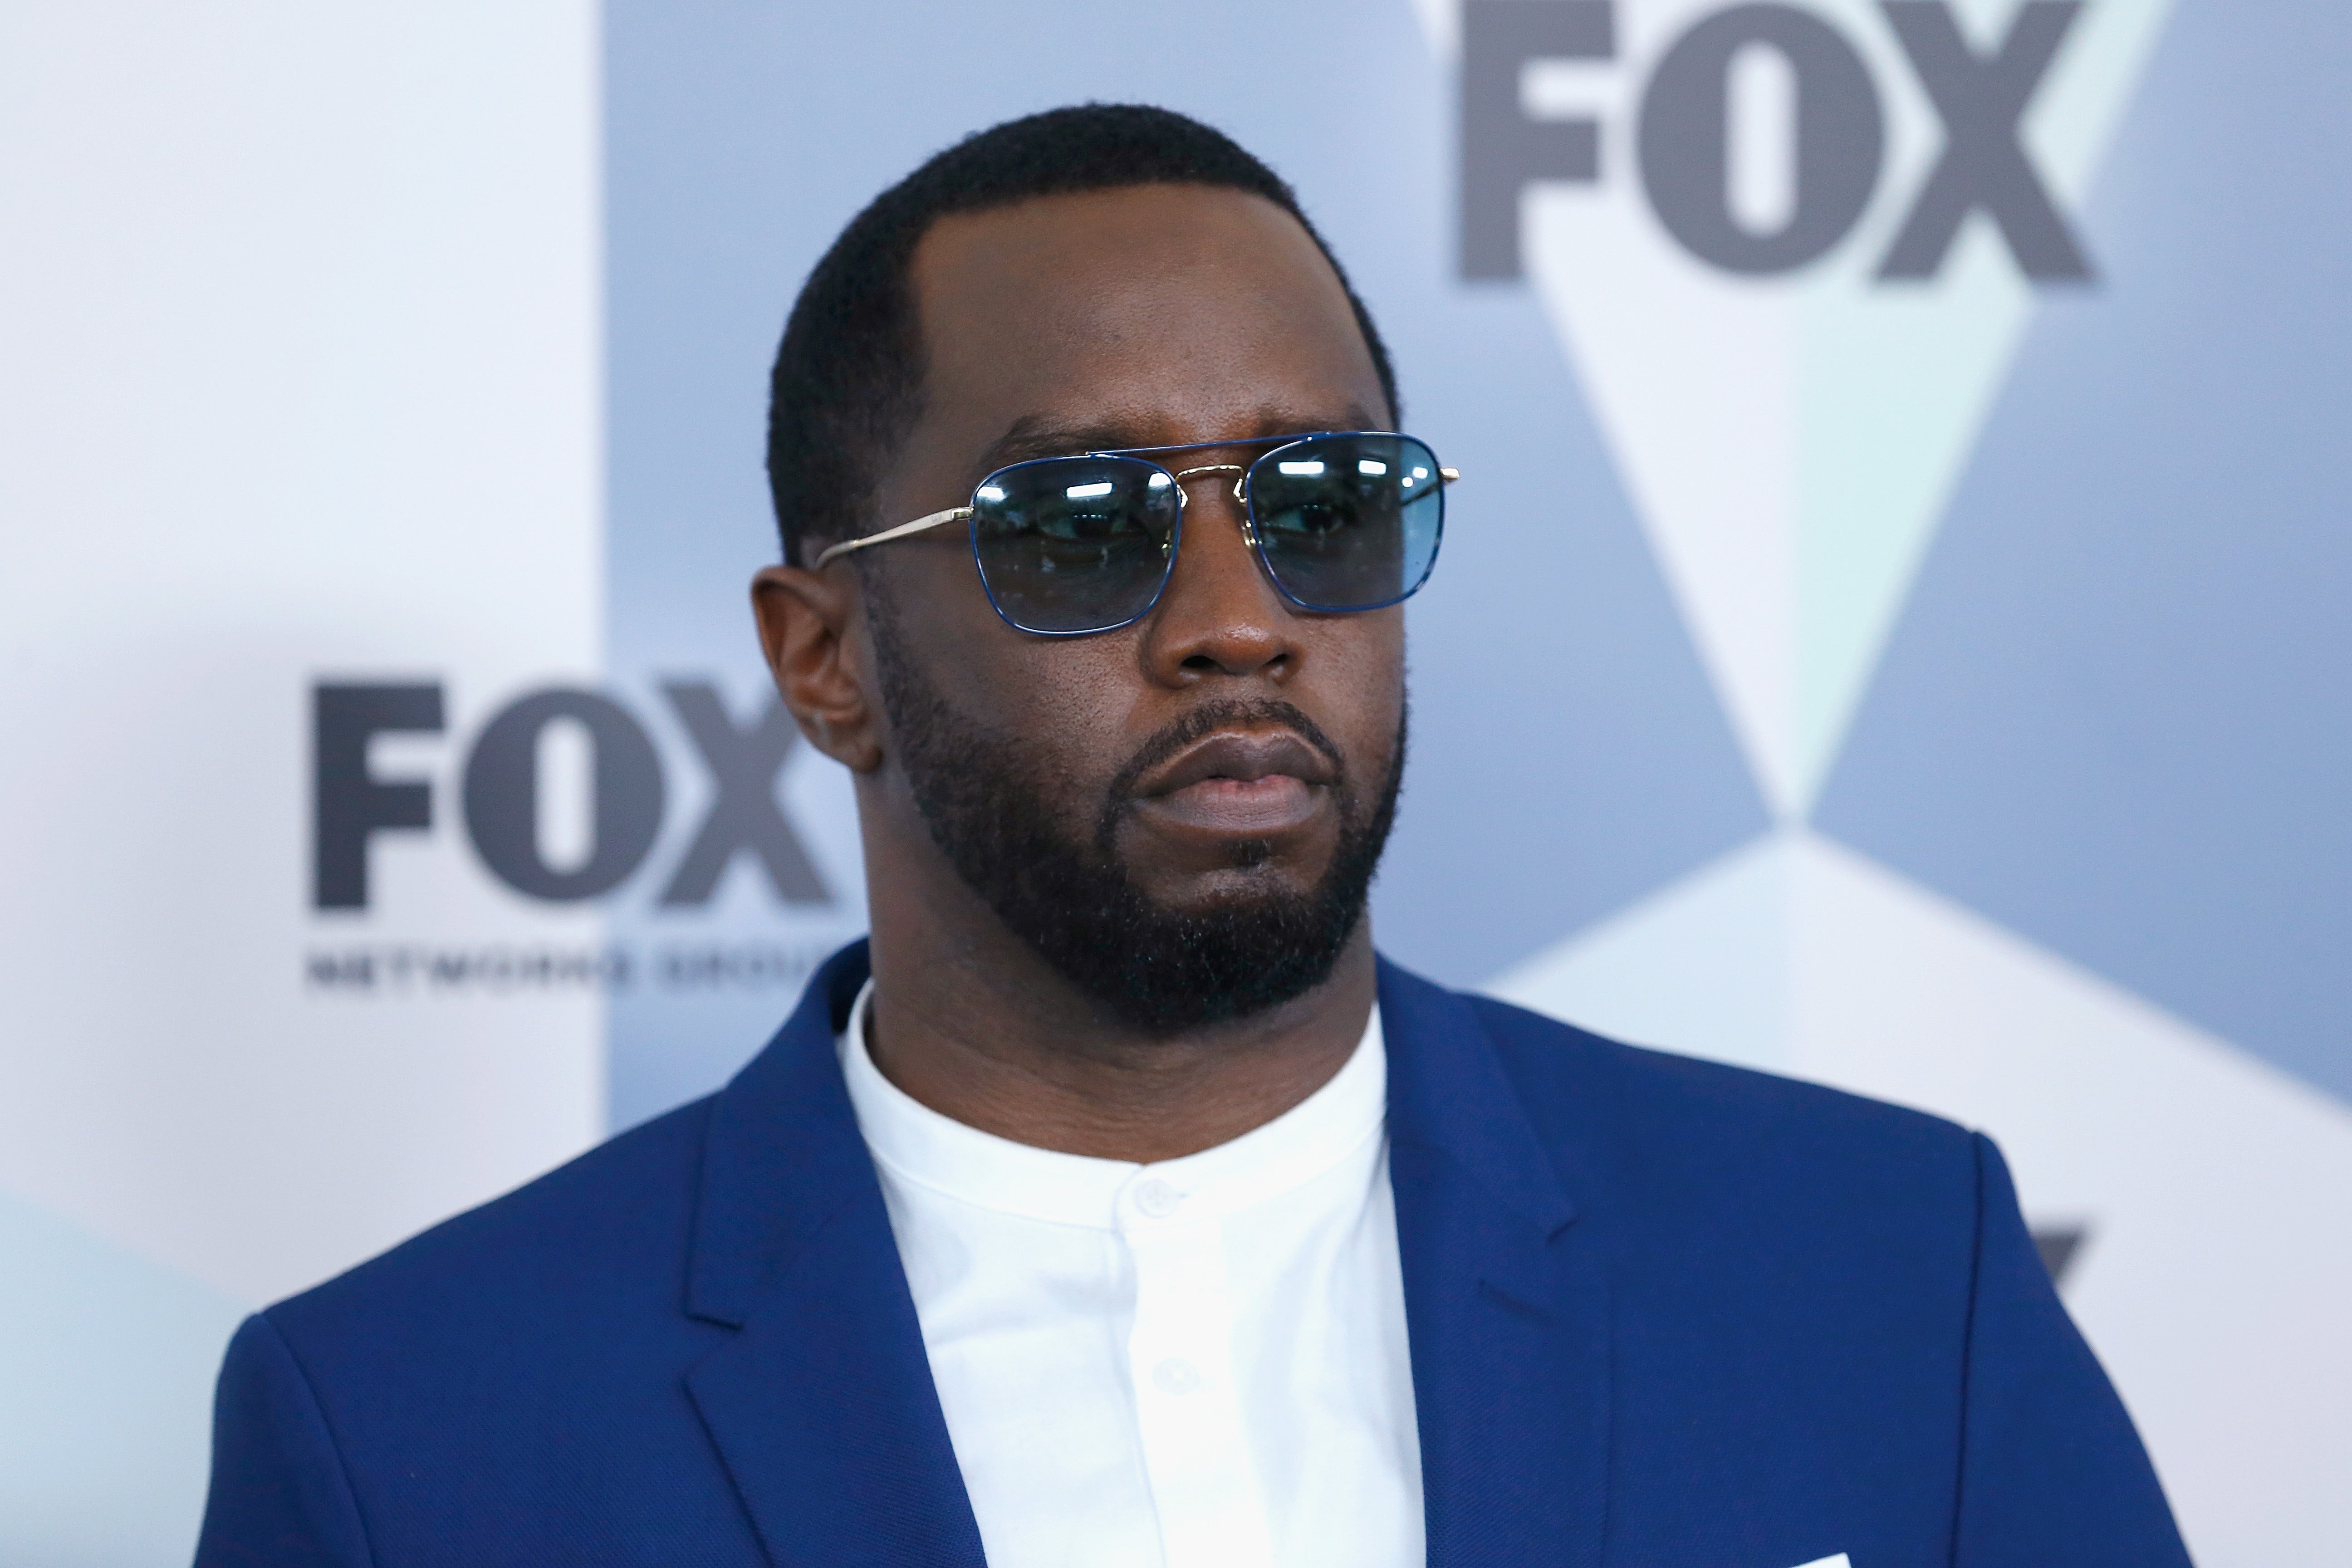 Sean ‘Diddy’ Combs reveals new middle name: 'Welcome to the Love Era'